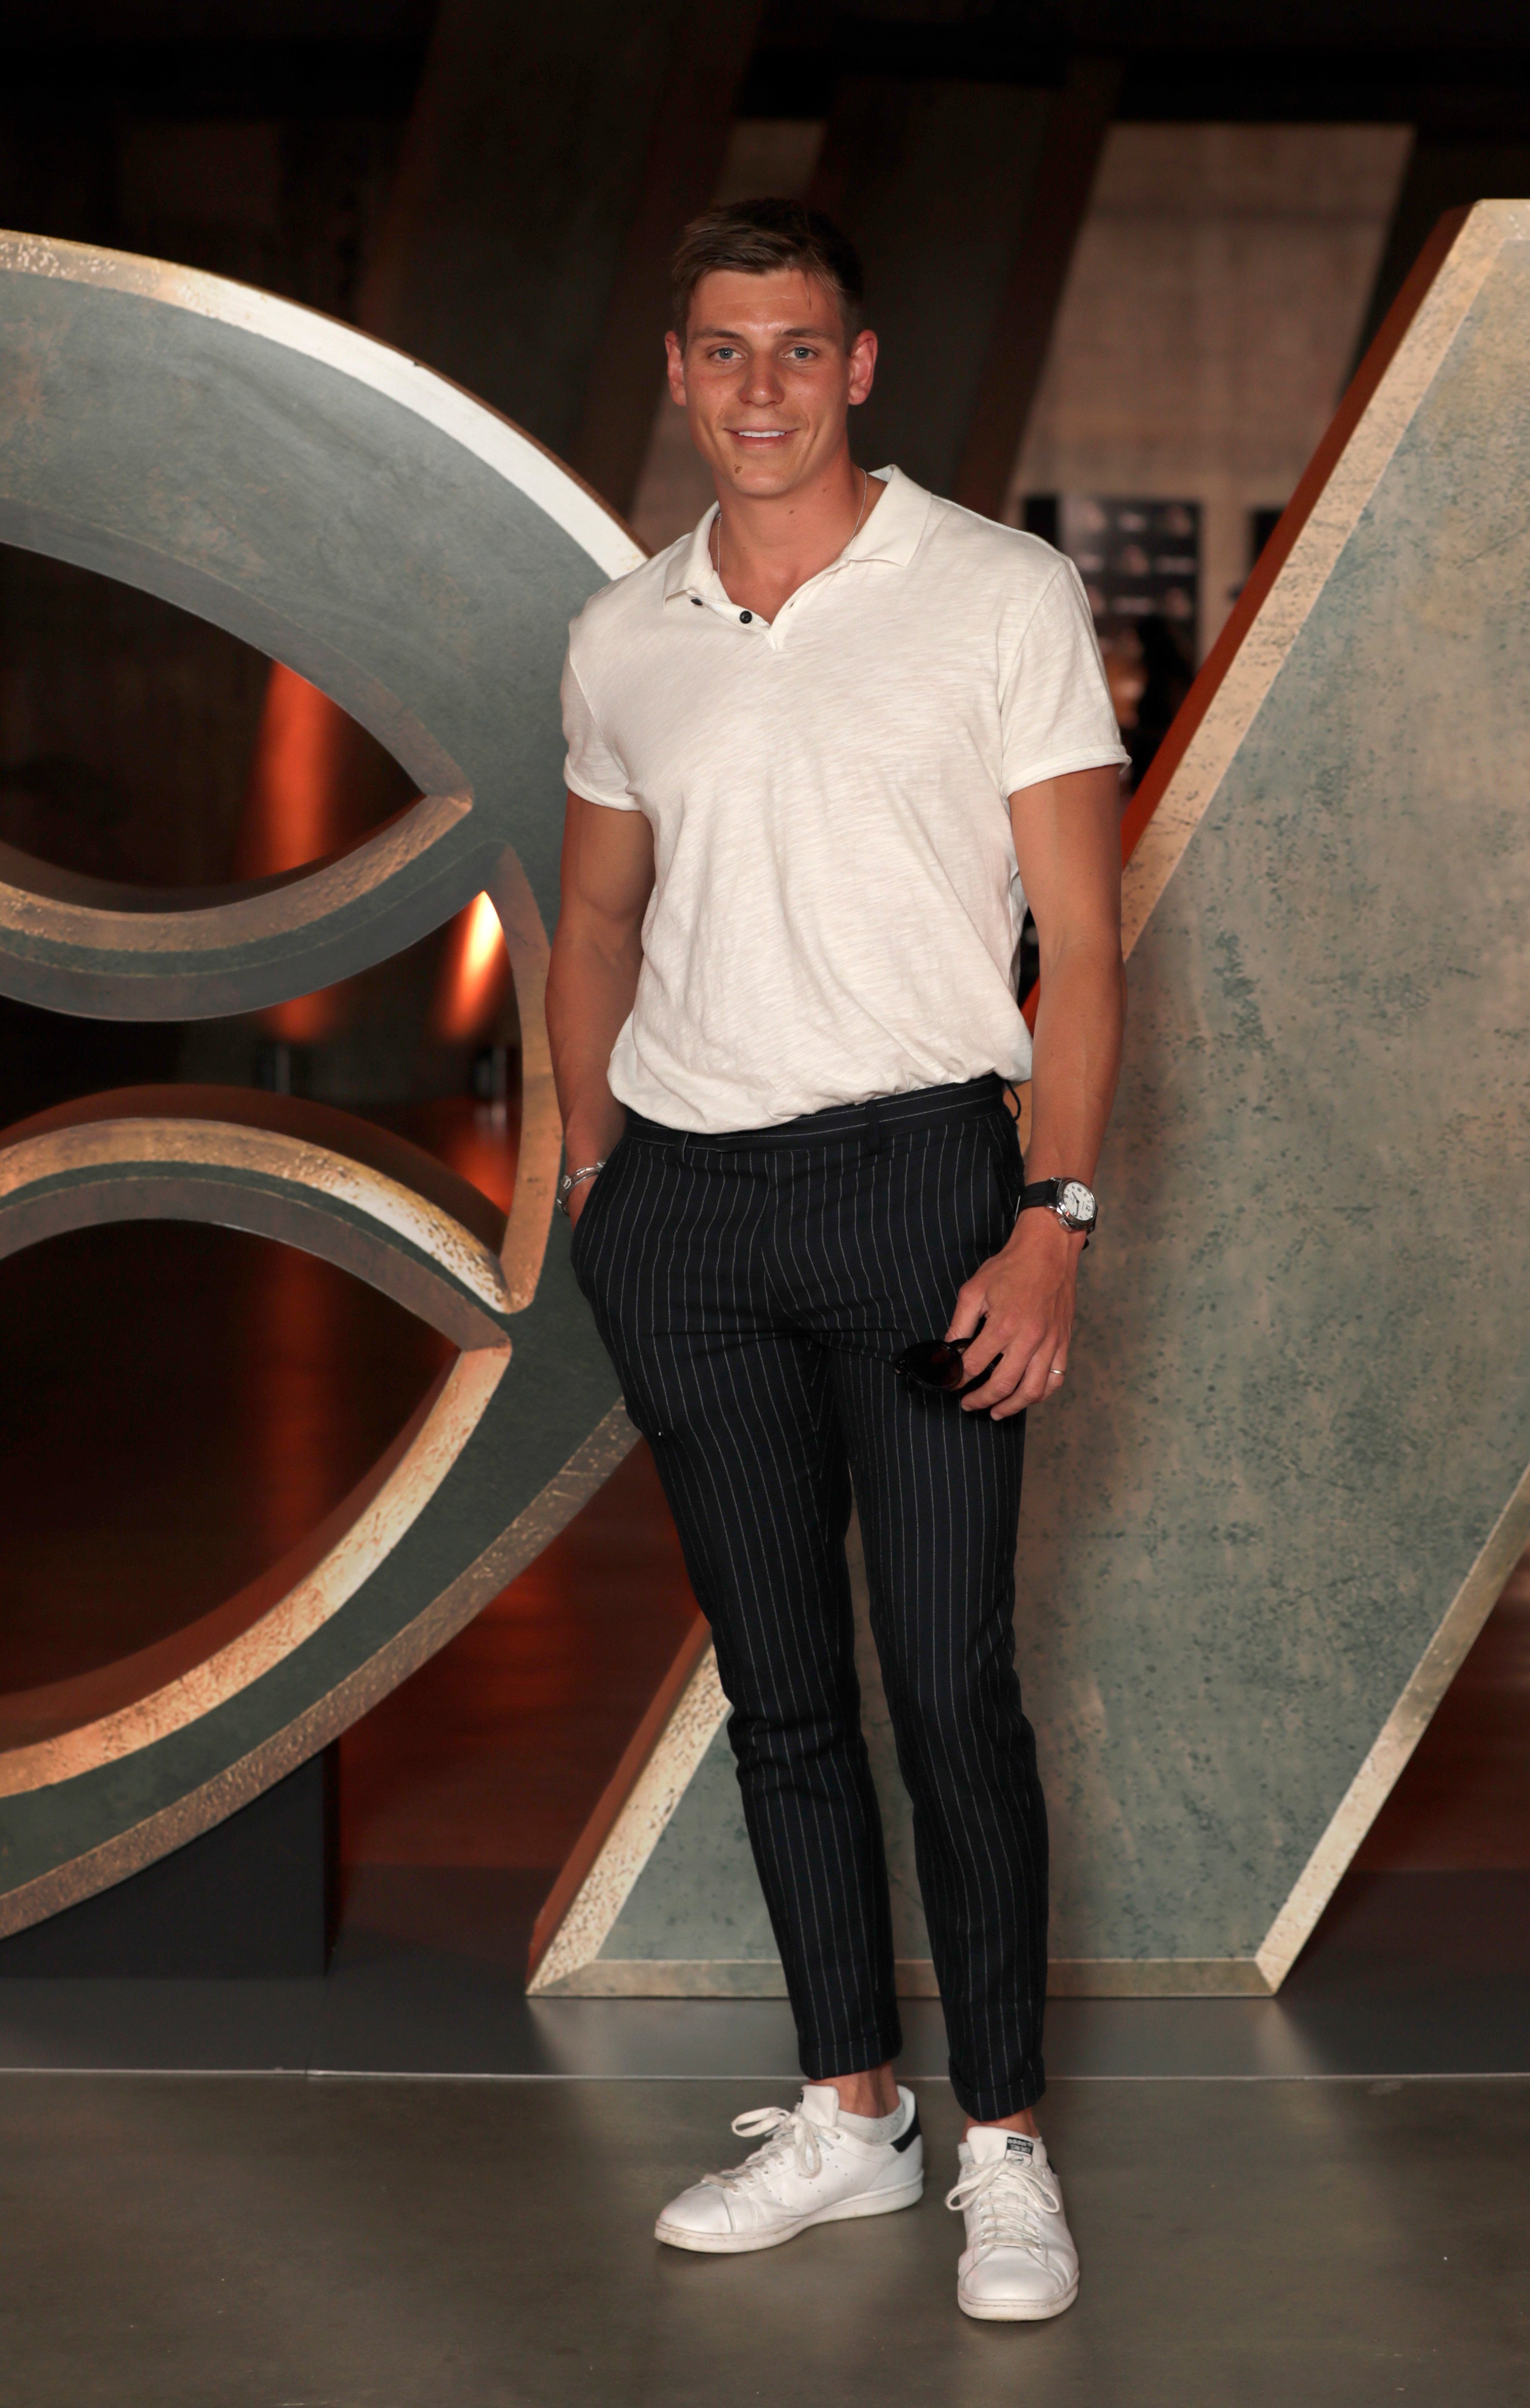 Tristan Phipps at an event in London in June 2021